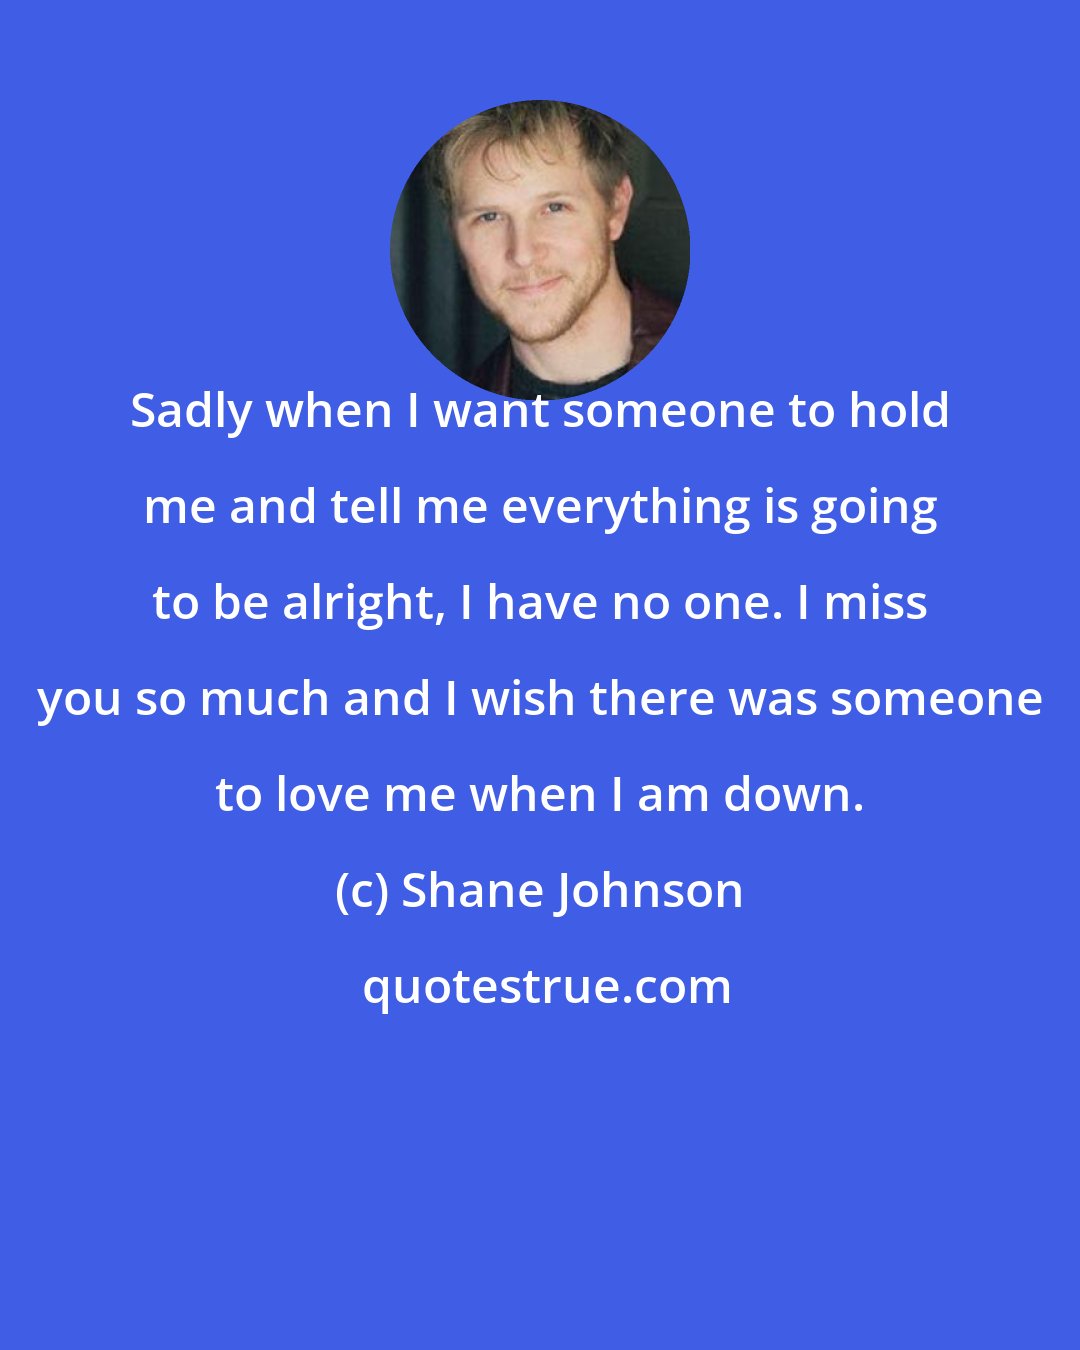 Shane Johnson: Sadly when I want someone to hold me and tell me everything is going to be alright, I have no one. I miss you so much and I wish there was someone to love me when I am down.